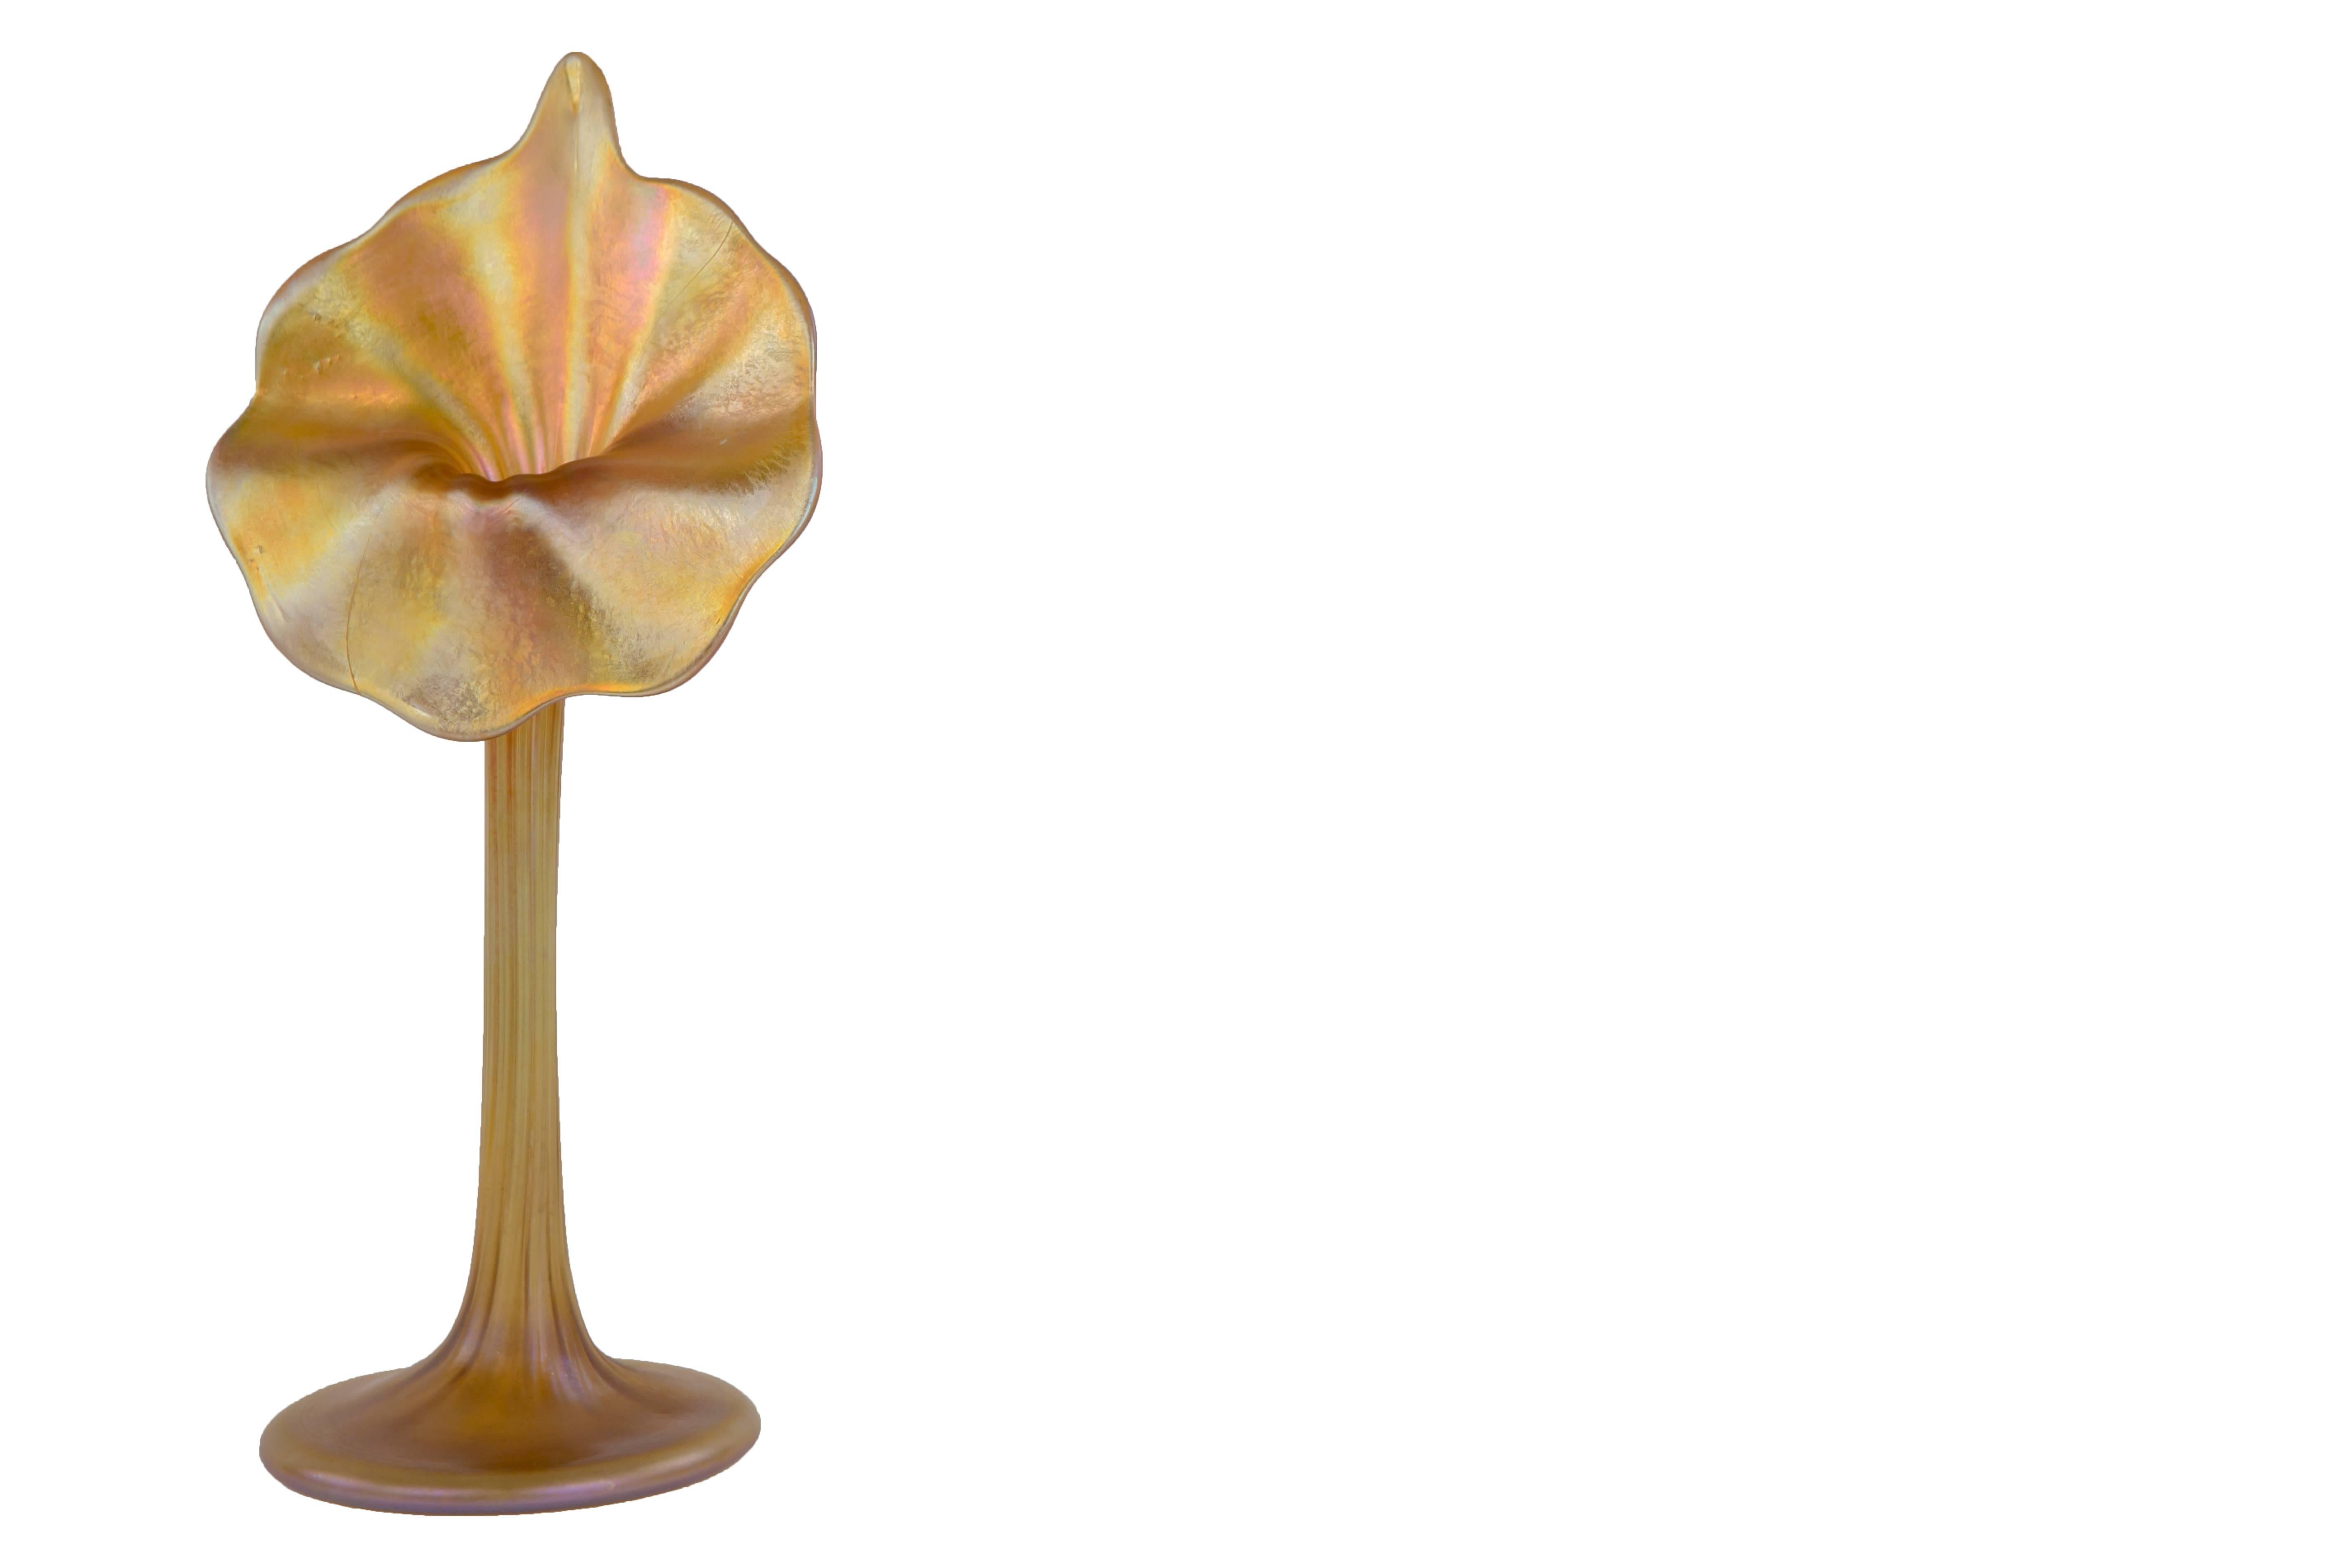 An American Art Nouveau blown glass Favrile Jack-in-the-Pulpit Flowerform Vase by, Tiffany Studios decorated in an iridescent gold coloration with ribbed stem and uniform opening. The vase is signed, 